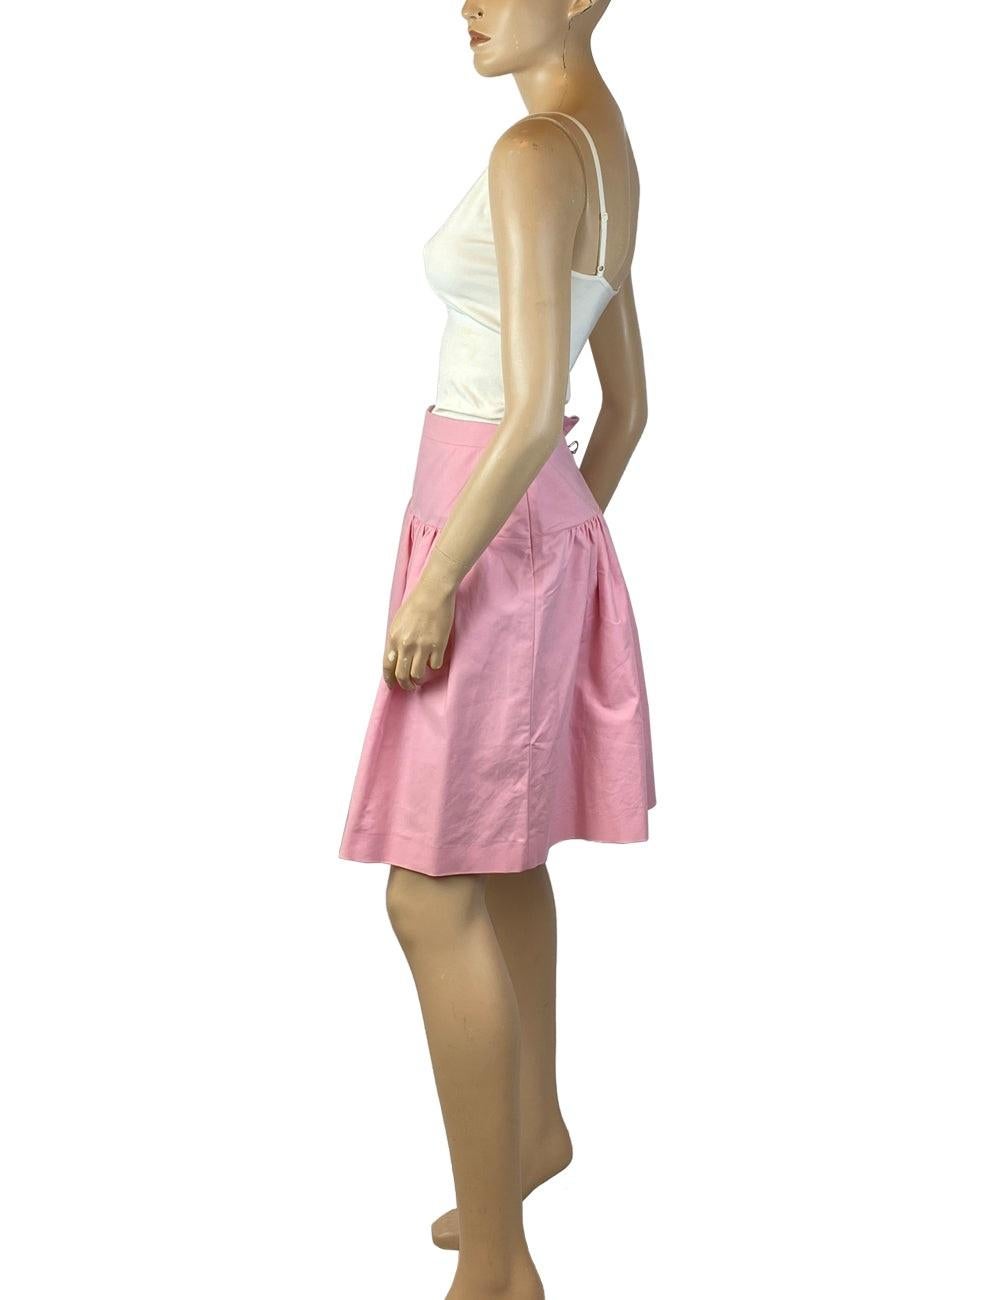 Pink Boutique Moschino circle skirt. 

Additional information:
Material: Cotton
Size: EU 40
Overall condition: Excellent 